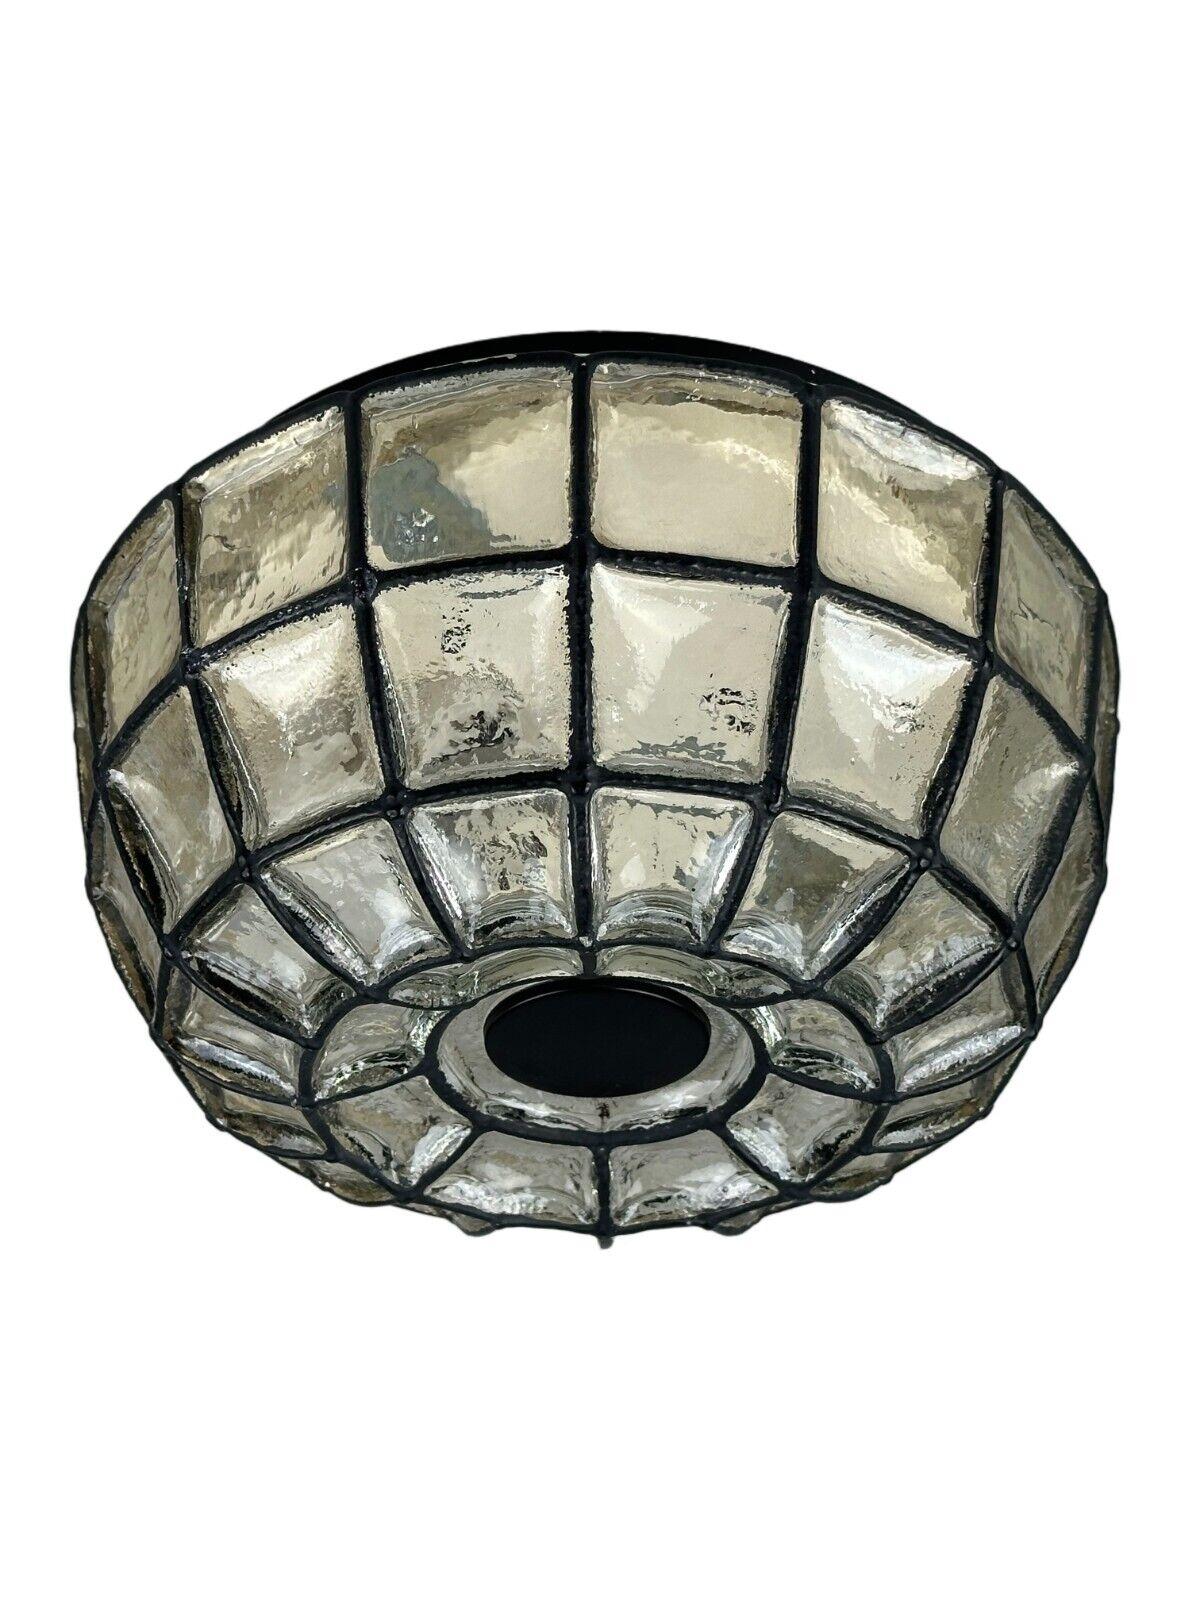 60s 70s ceiling lamp Glashütte Limburg Germany Plafoniere glass & metal

Object: wall lamp

Manufacturer: Glashütte Limburg

Condition: good

Age: around 1960-1970

Dimensions:

Diameter = 25cm
Height = 13cm

Material: glass, metal

Other